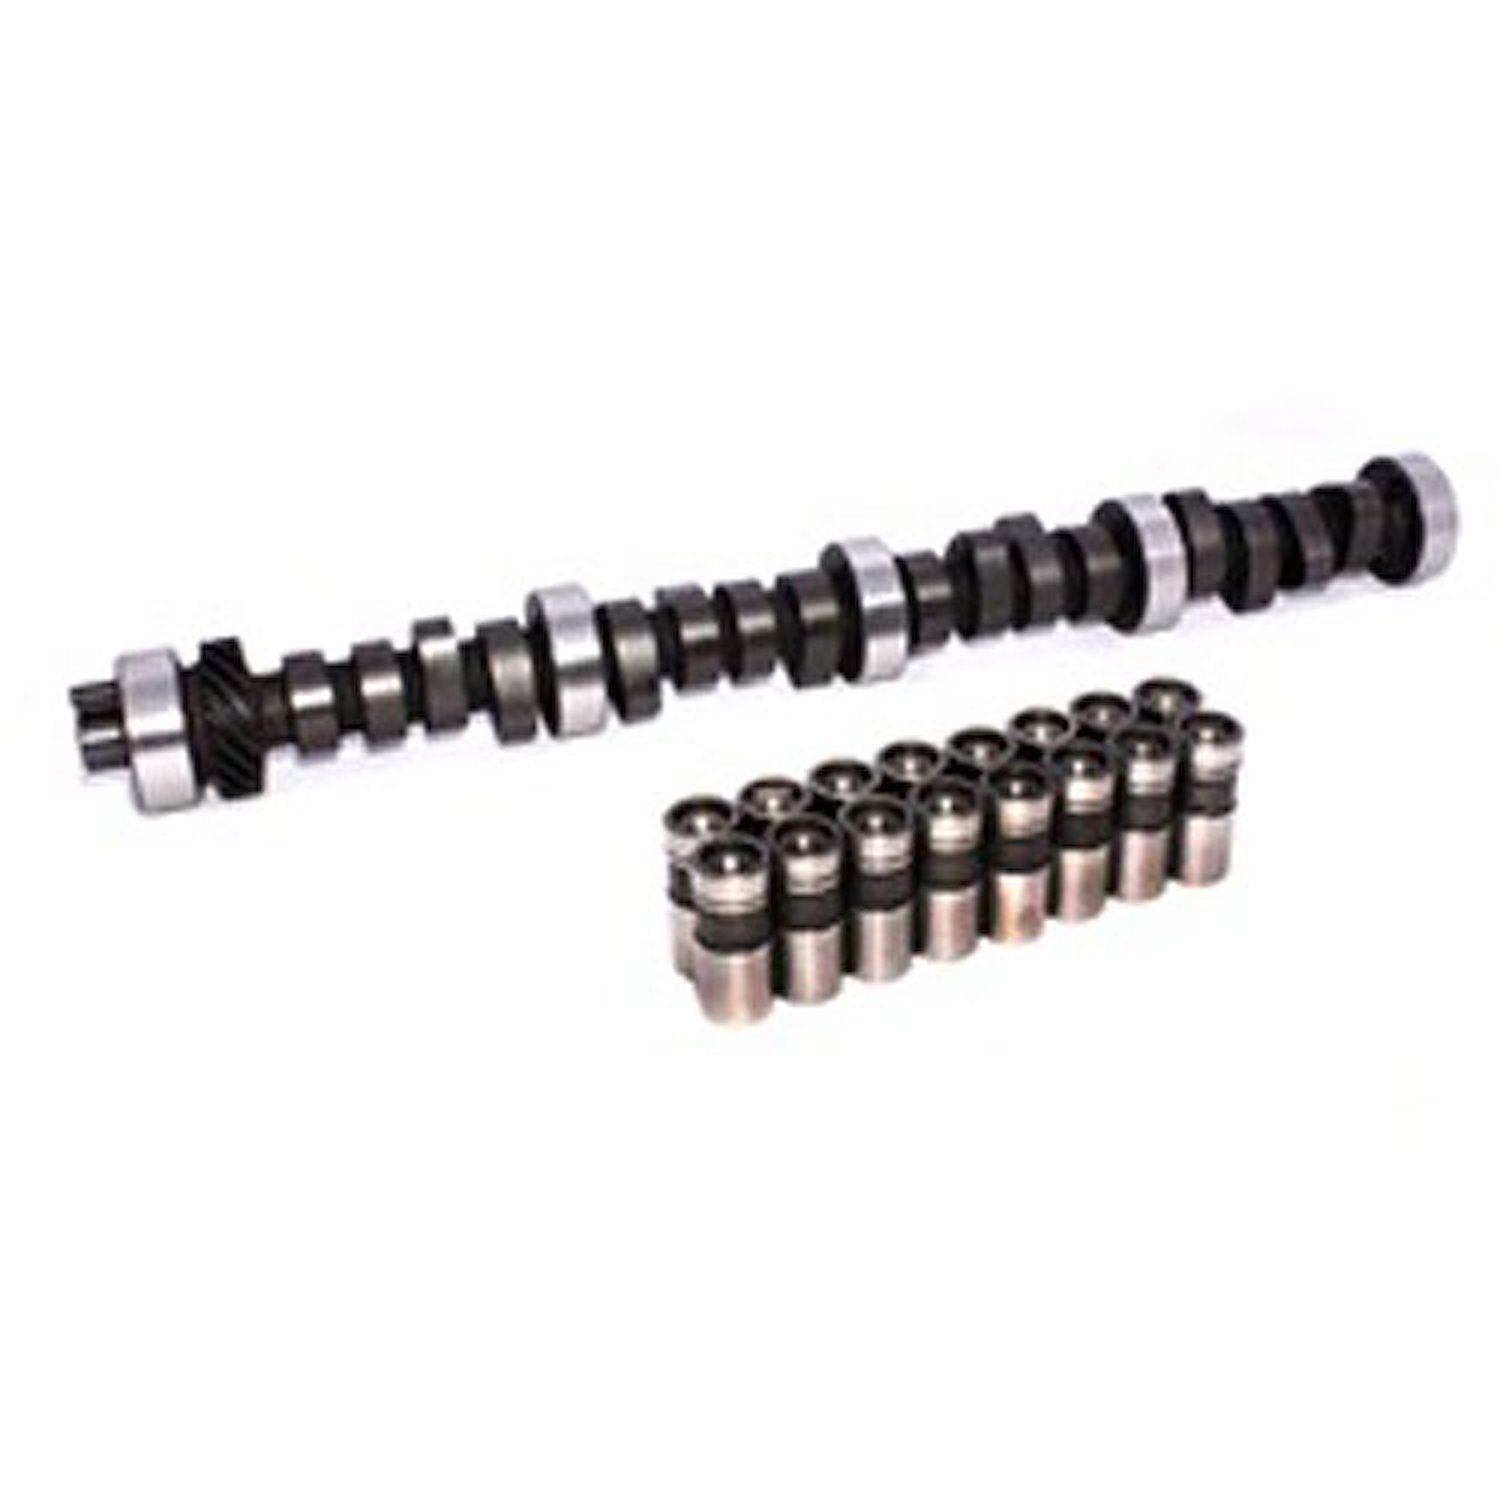 Big Mutha" Thumpr Hydraulic Flat Tappet Camshaft and Lifter Kit Lift .531"/.515" Duration 294/312 RPM Range 2500-6400